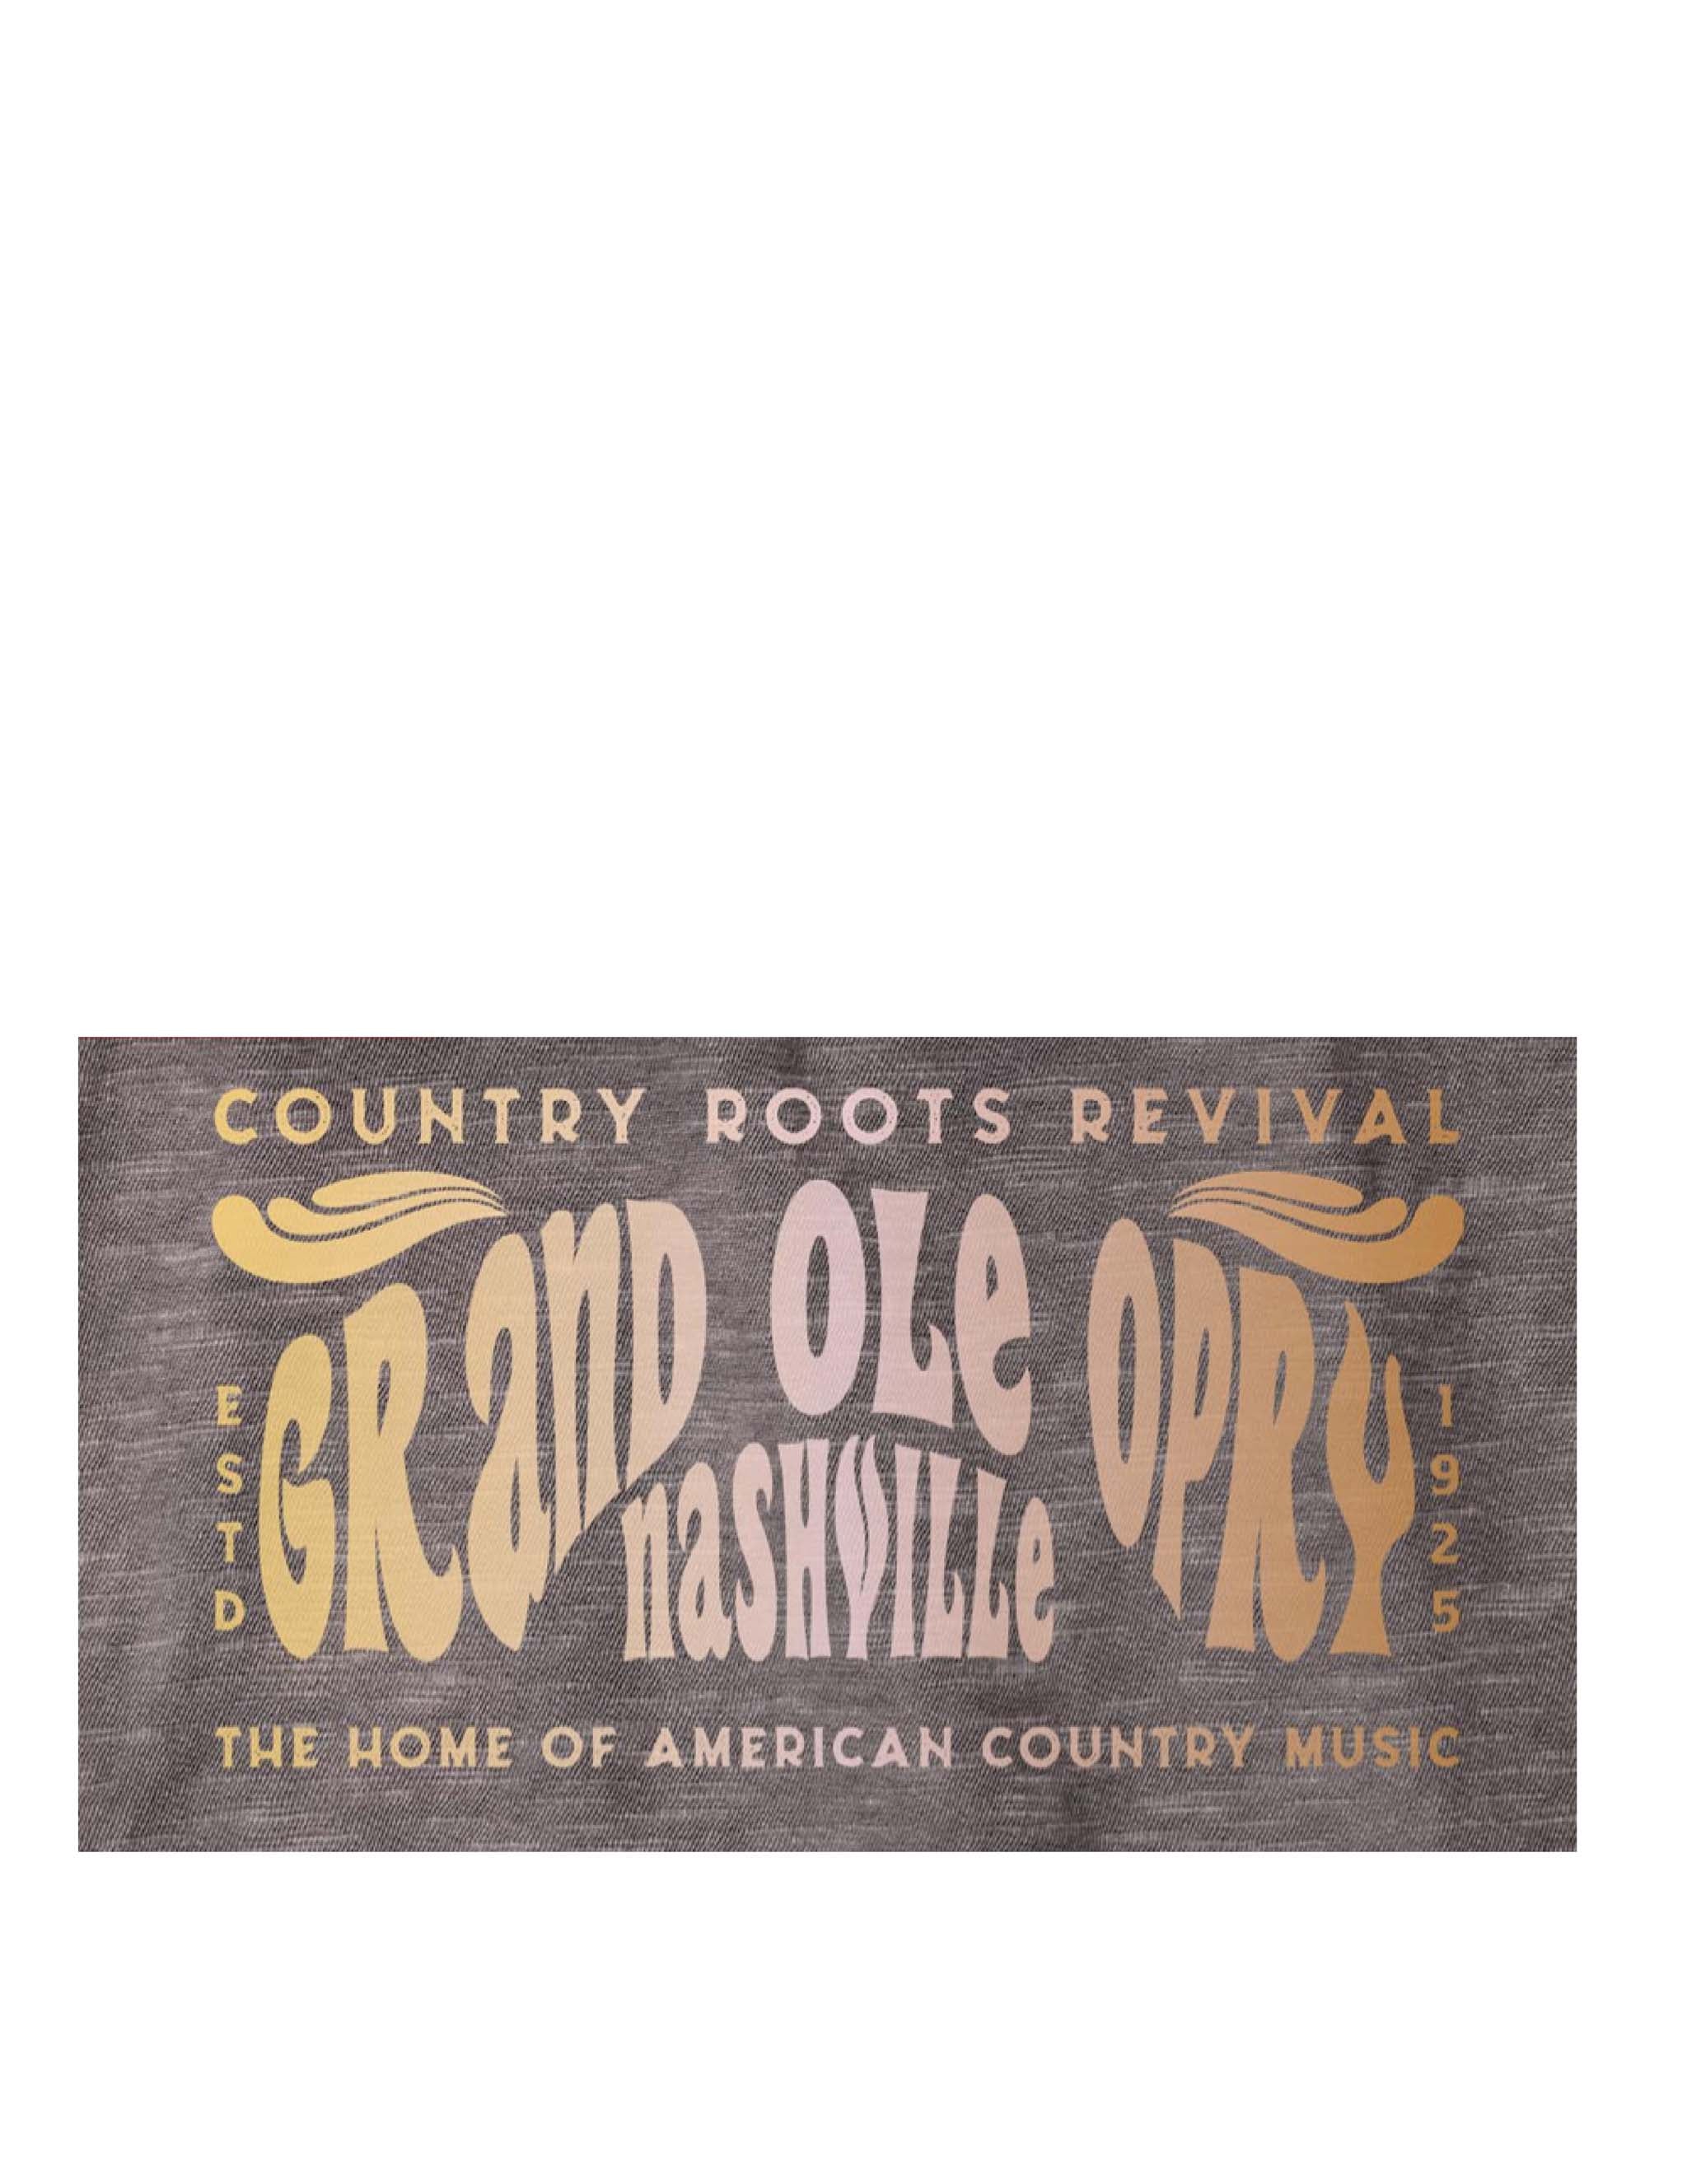 Opry Country Revival T-Shirt